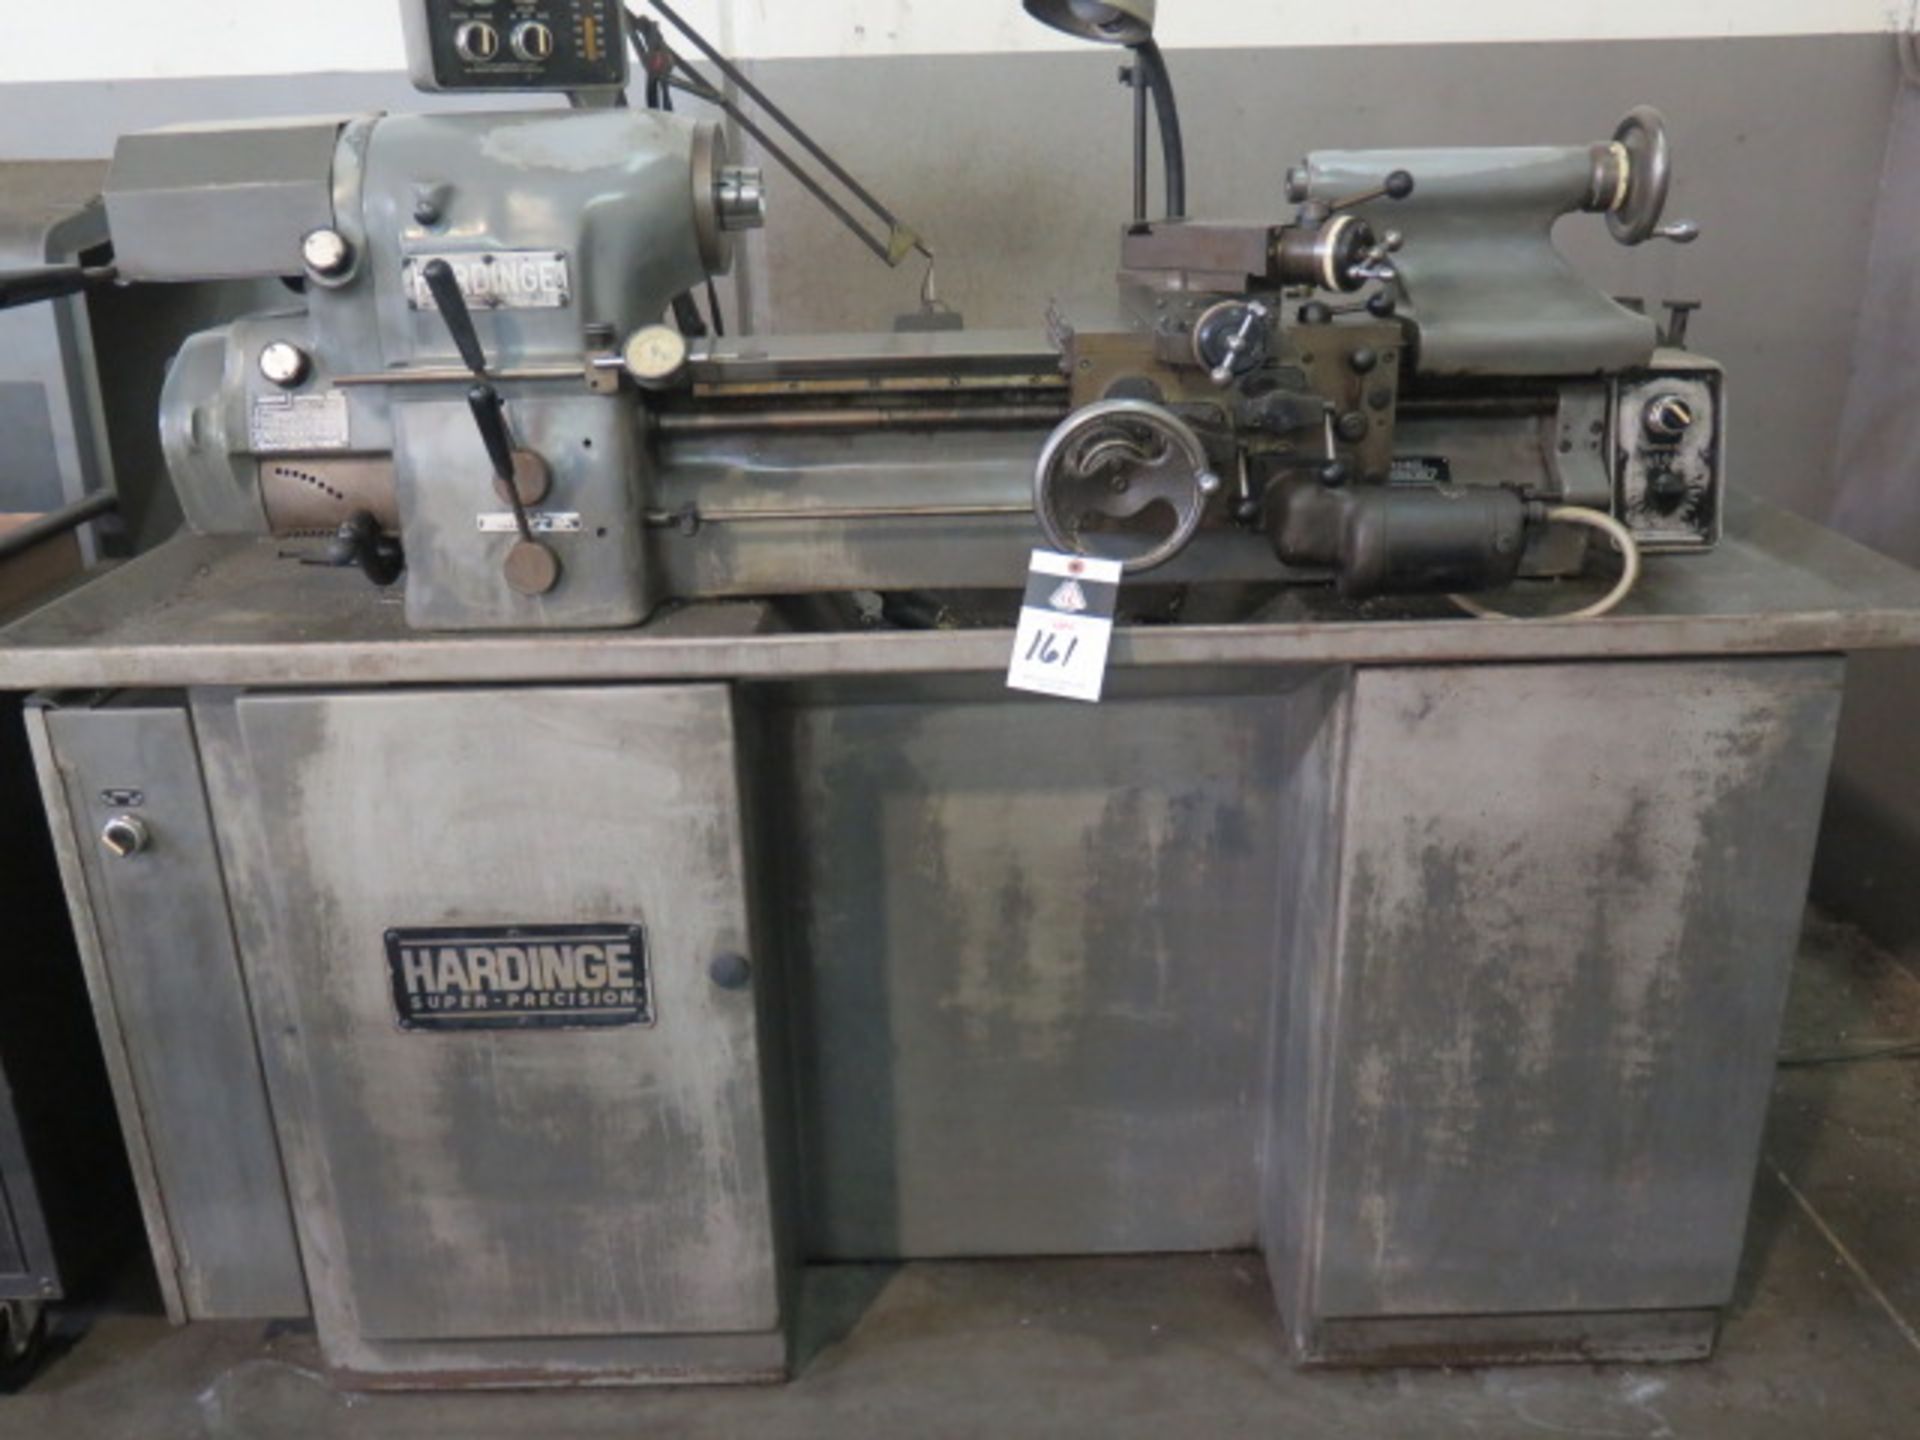 Hardinge HLV-H Wide Bed Tool Room Lathe w/ 125-3000 RPM, Inch Threading, Power Feed, Tailstock,